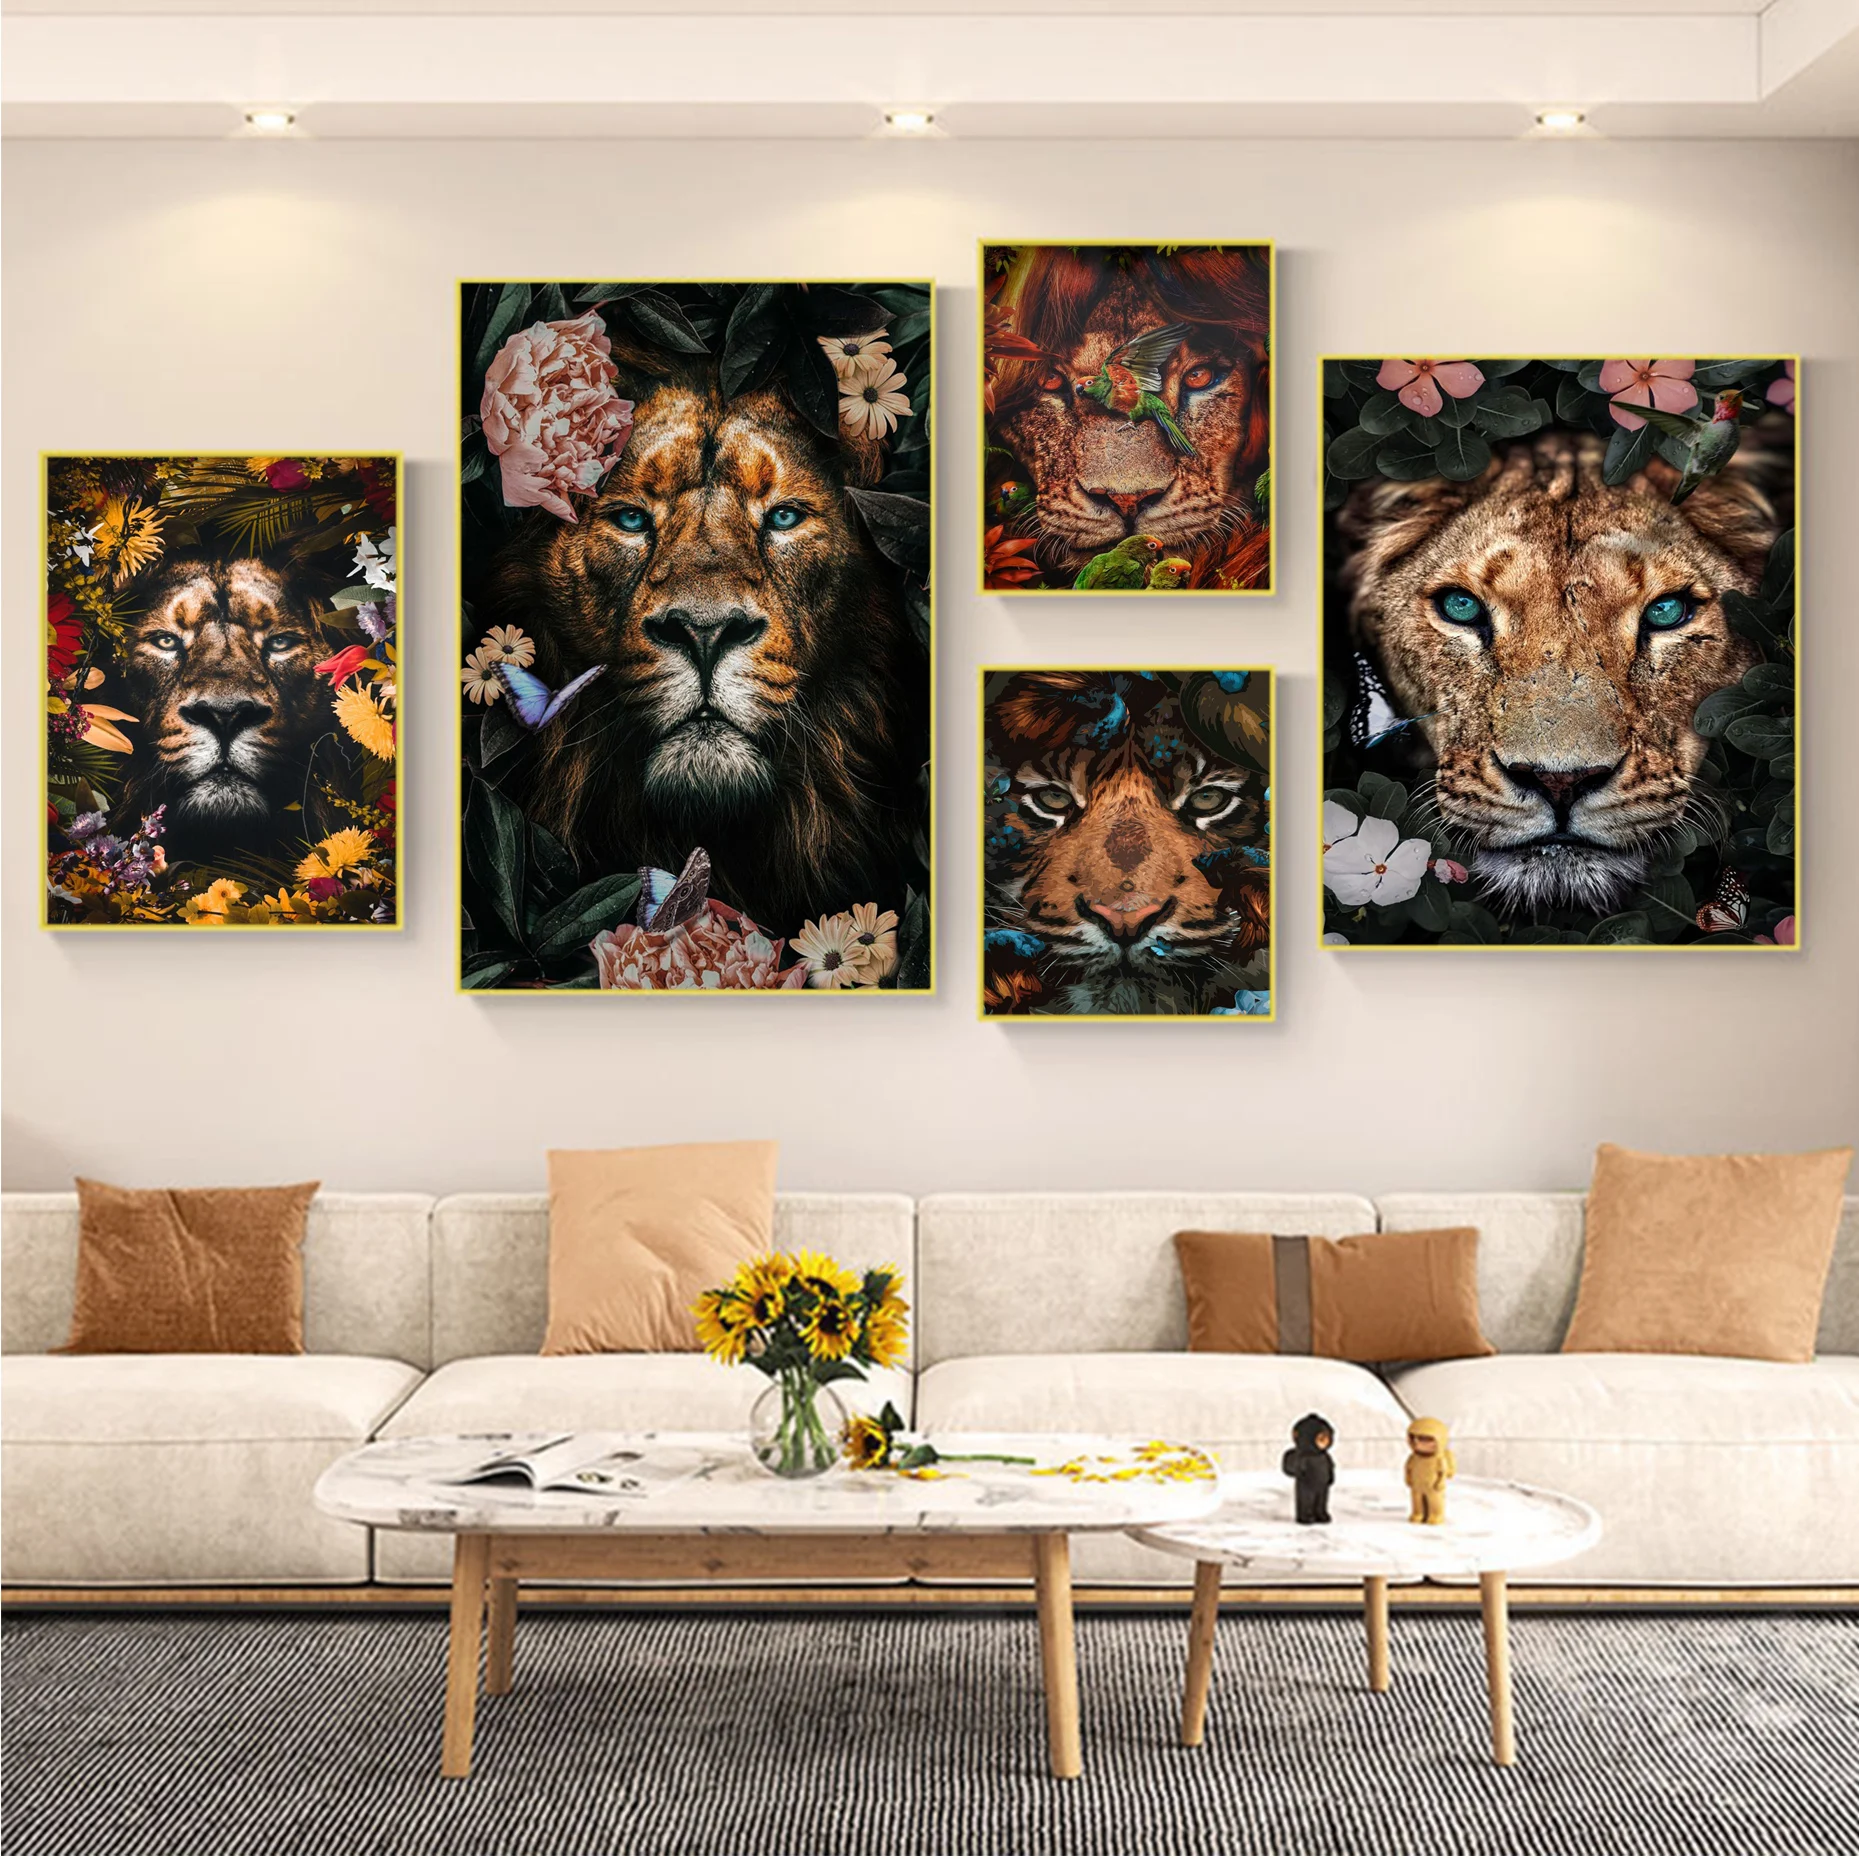 

Flower Animal Good Quality Prints And Posters Decoracion Painting Wall Art White Kraft Paper Decor Art Wall Stickers